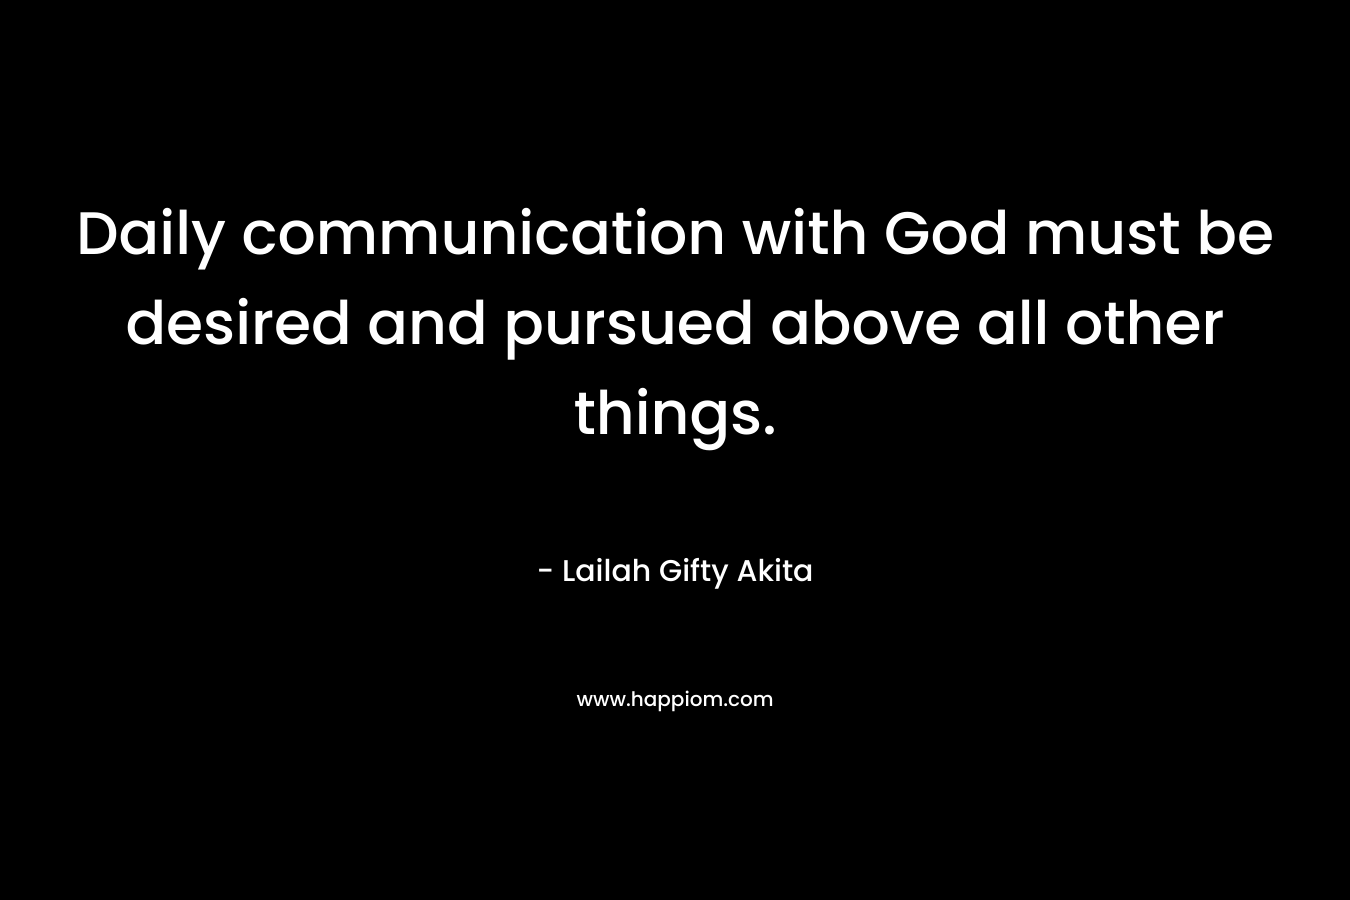 Daily communication with God must be desired and pursued above all other things.